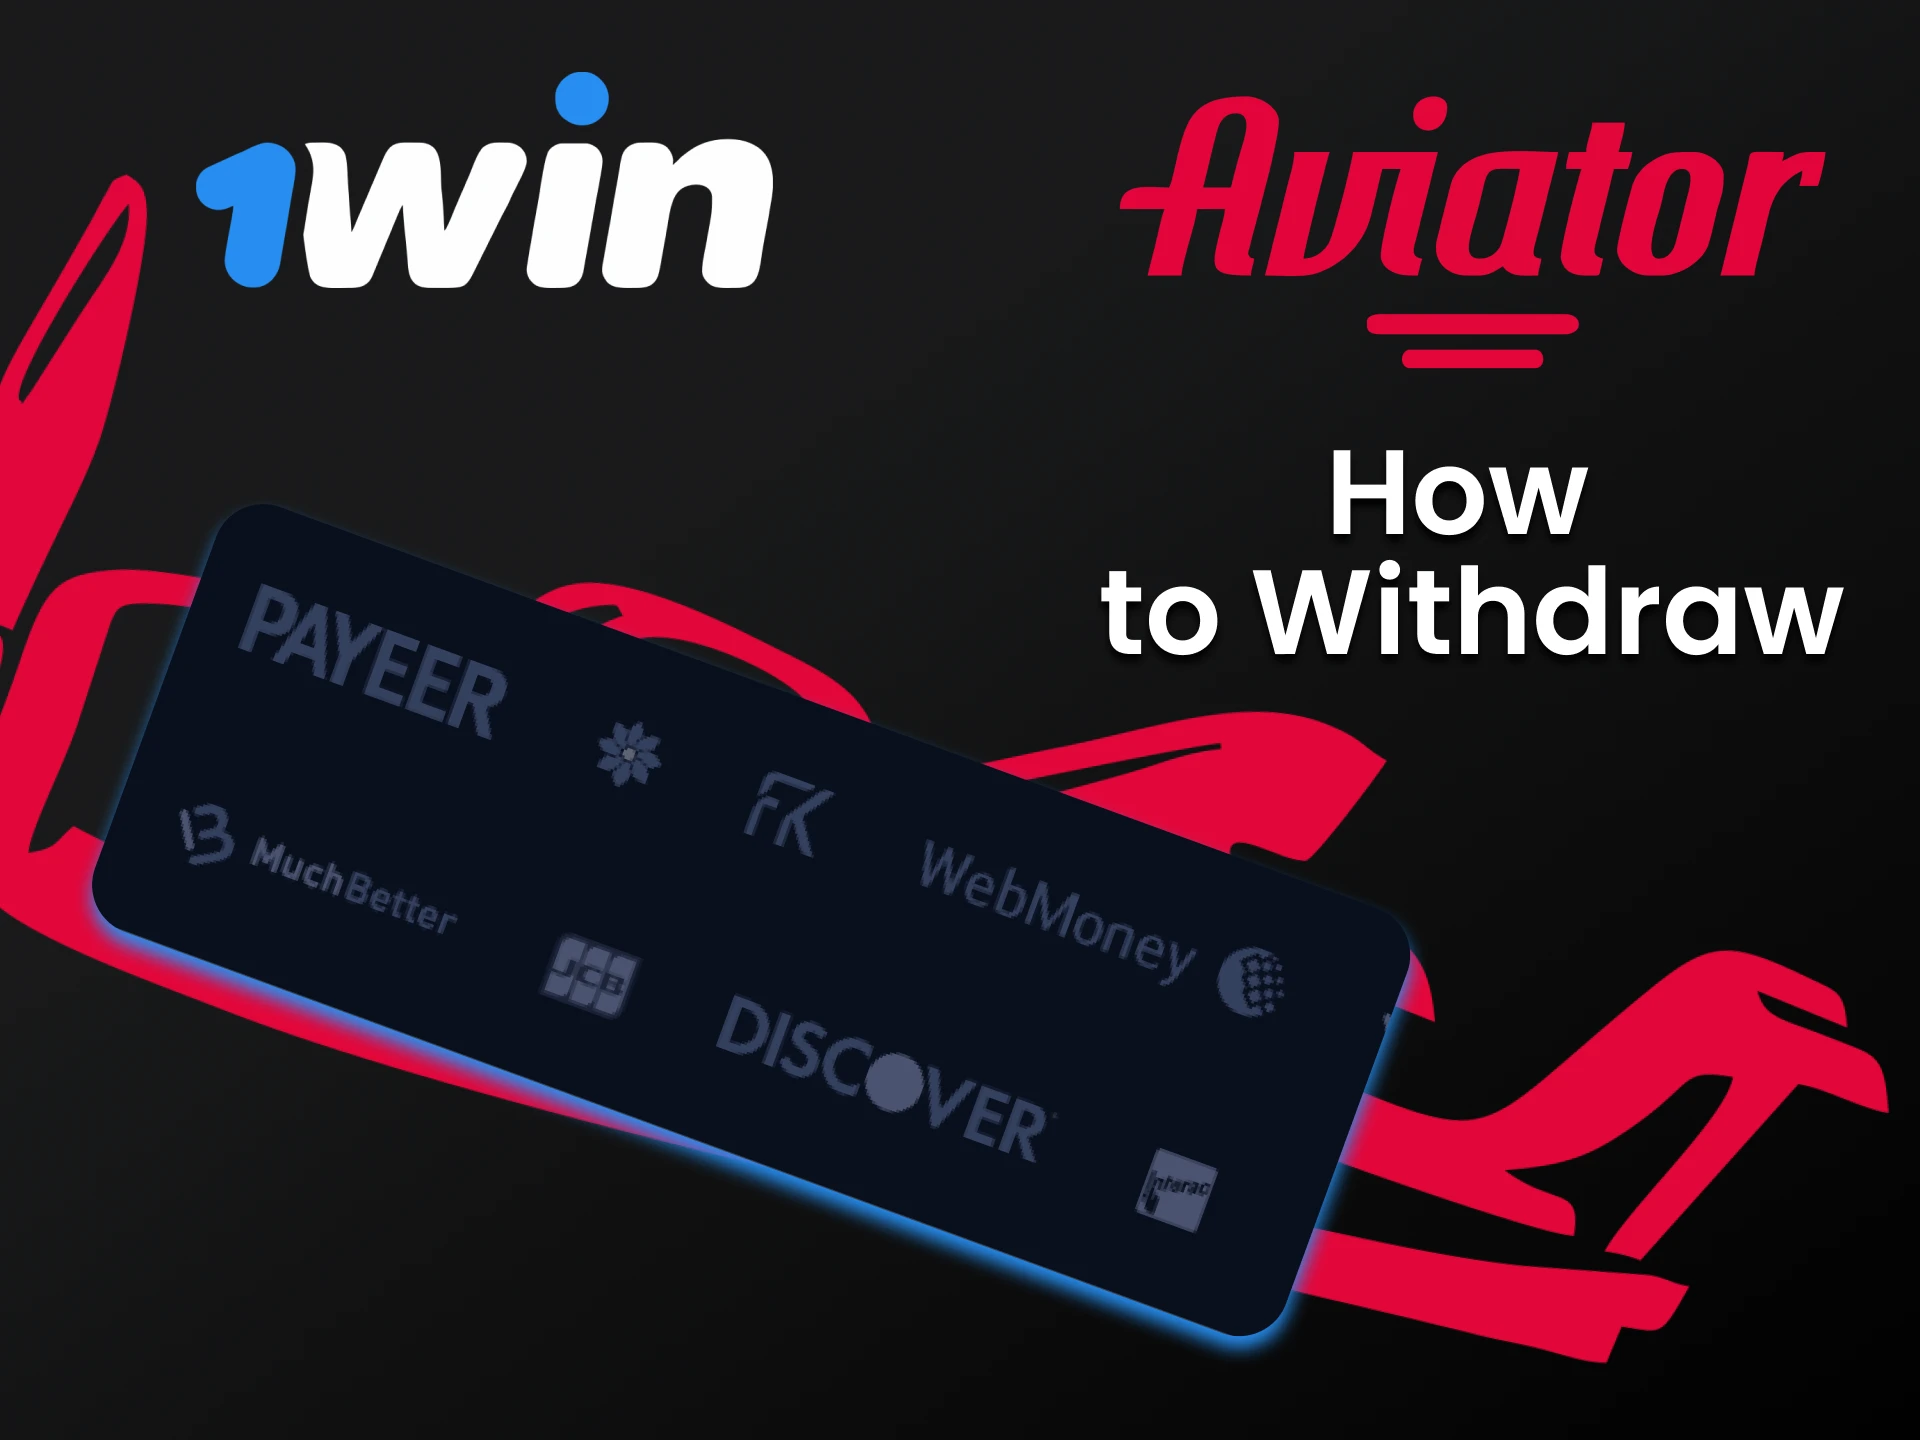 Choose a convenient way to withdraw money from 1win.